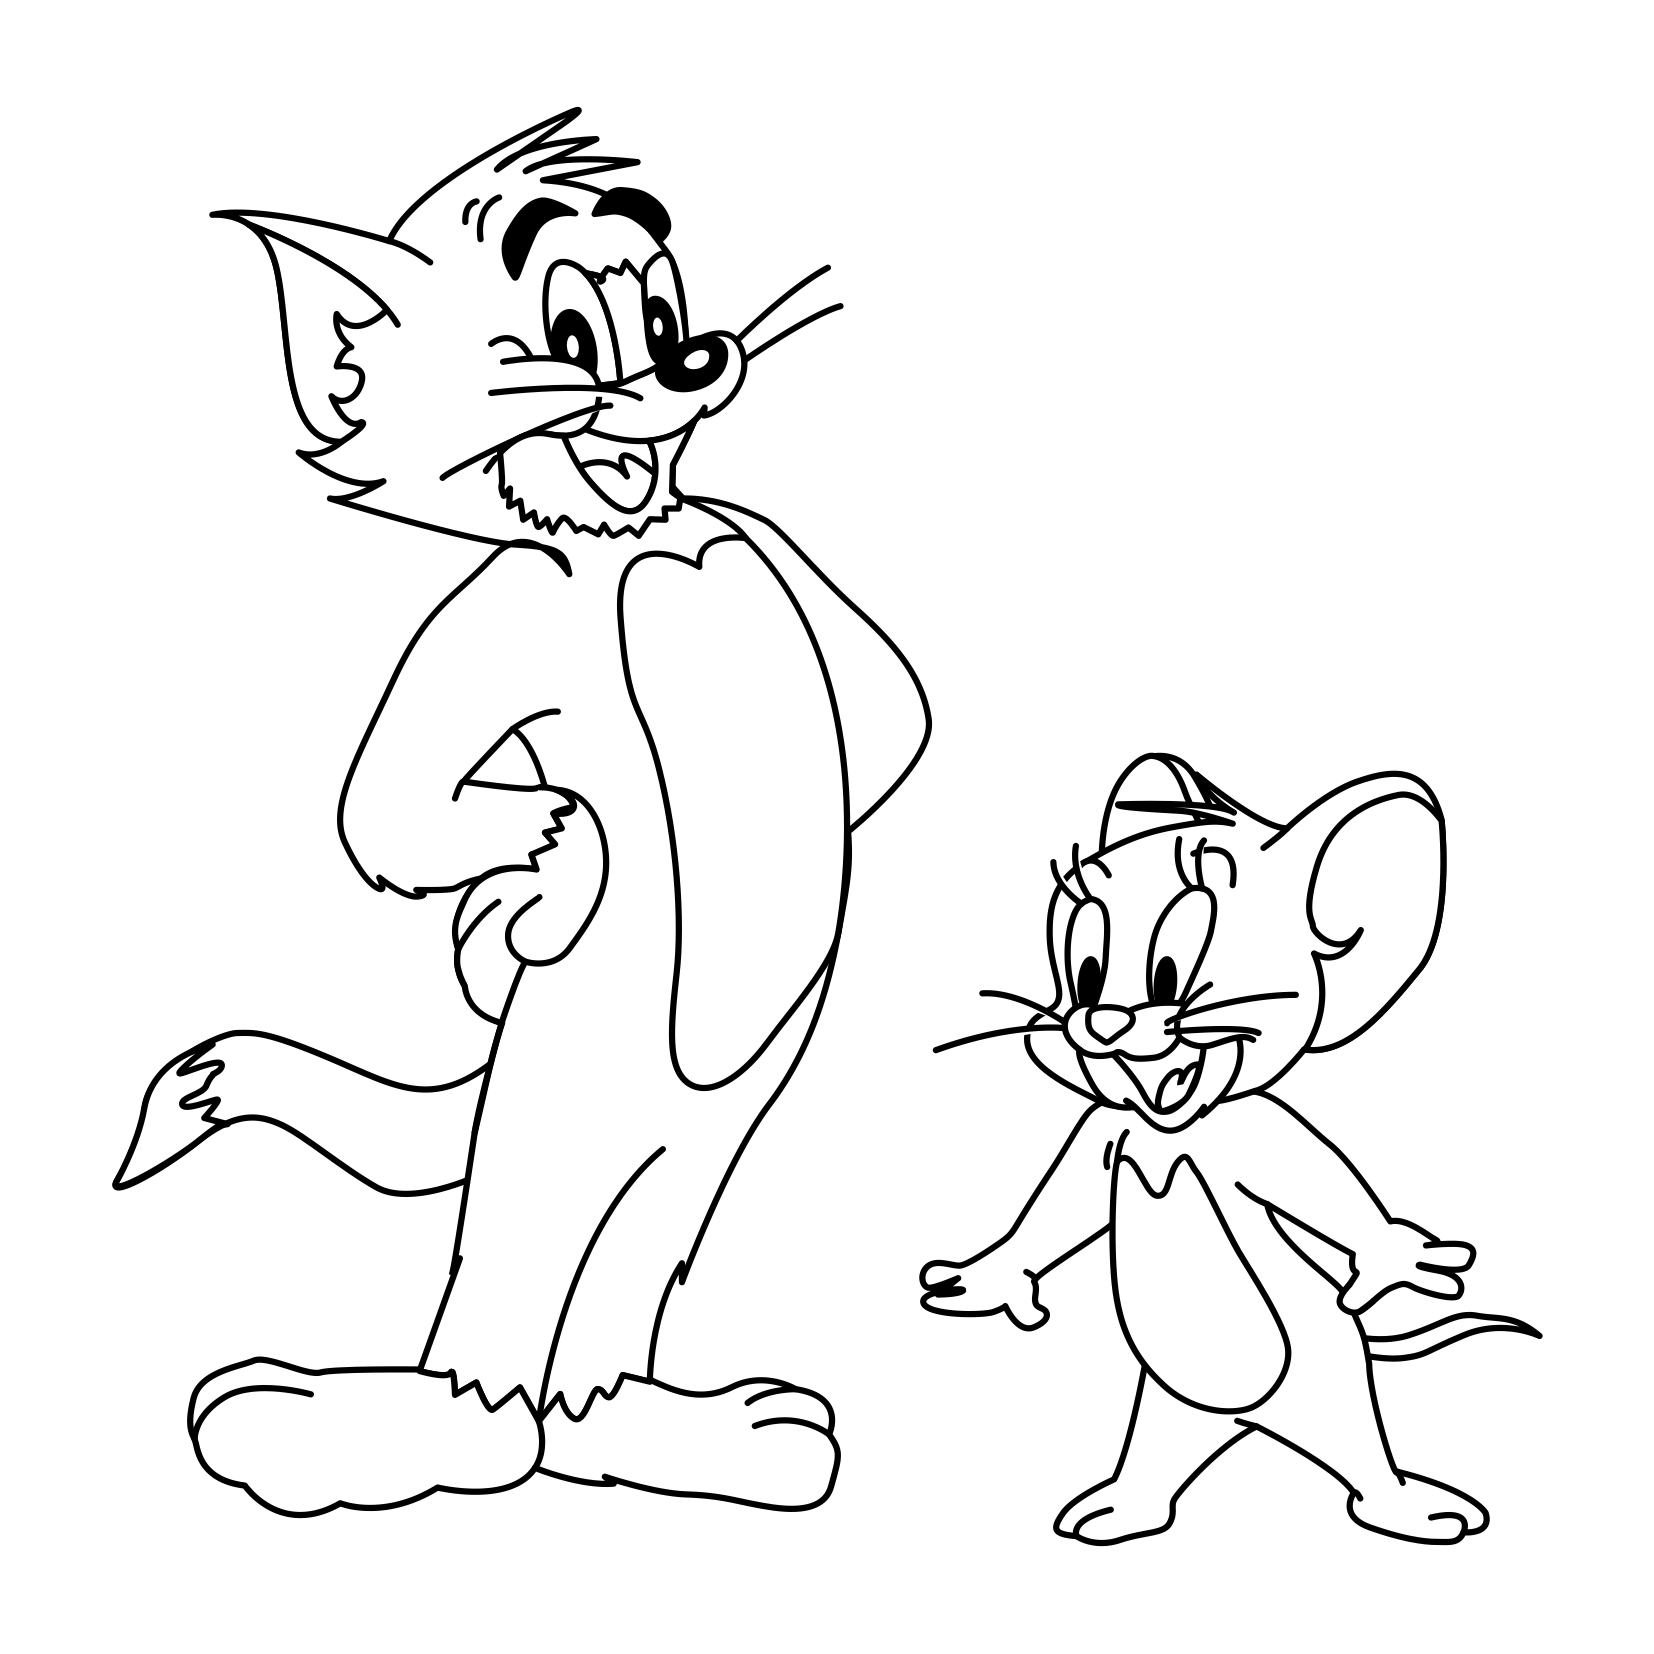 Tom And Jerry Christmas Coloring Sheets In Color Of Of ...